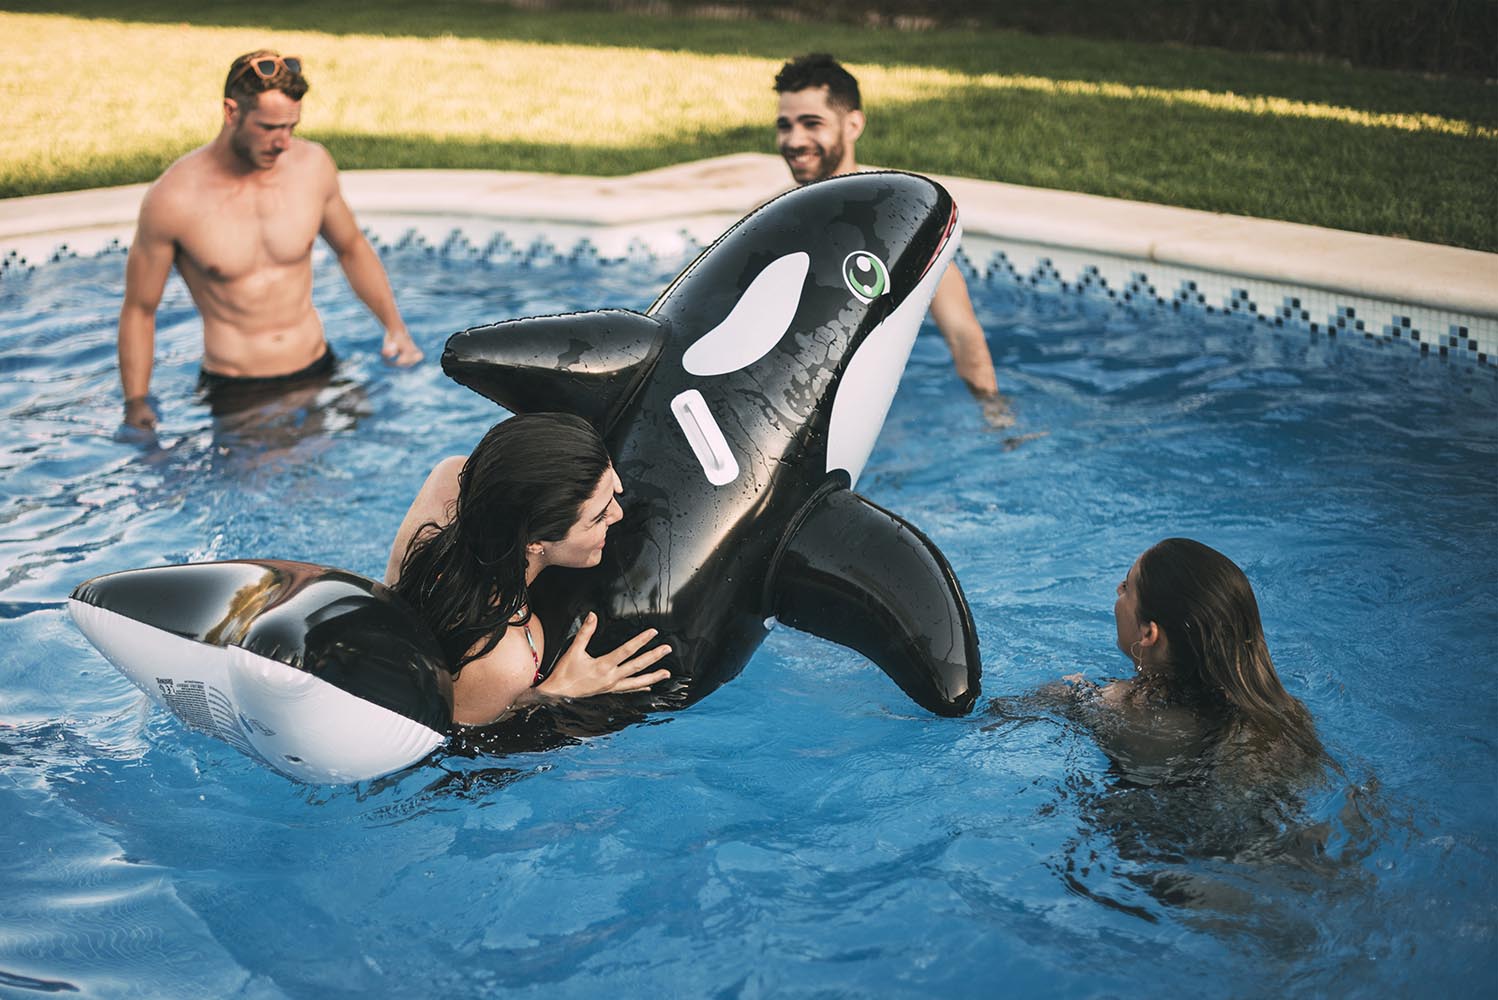 Friends swimming on inflatable toy in pool